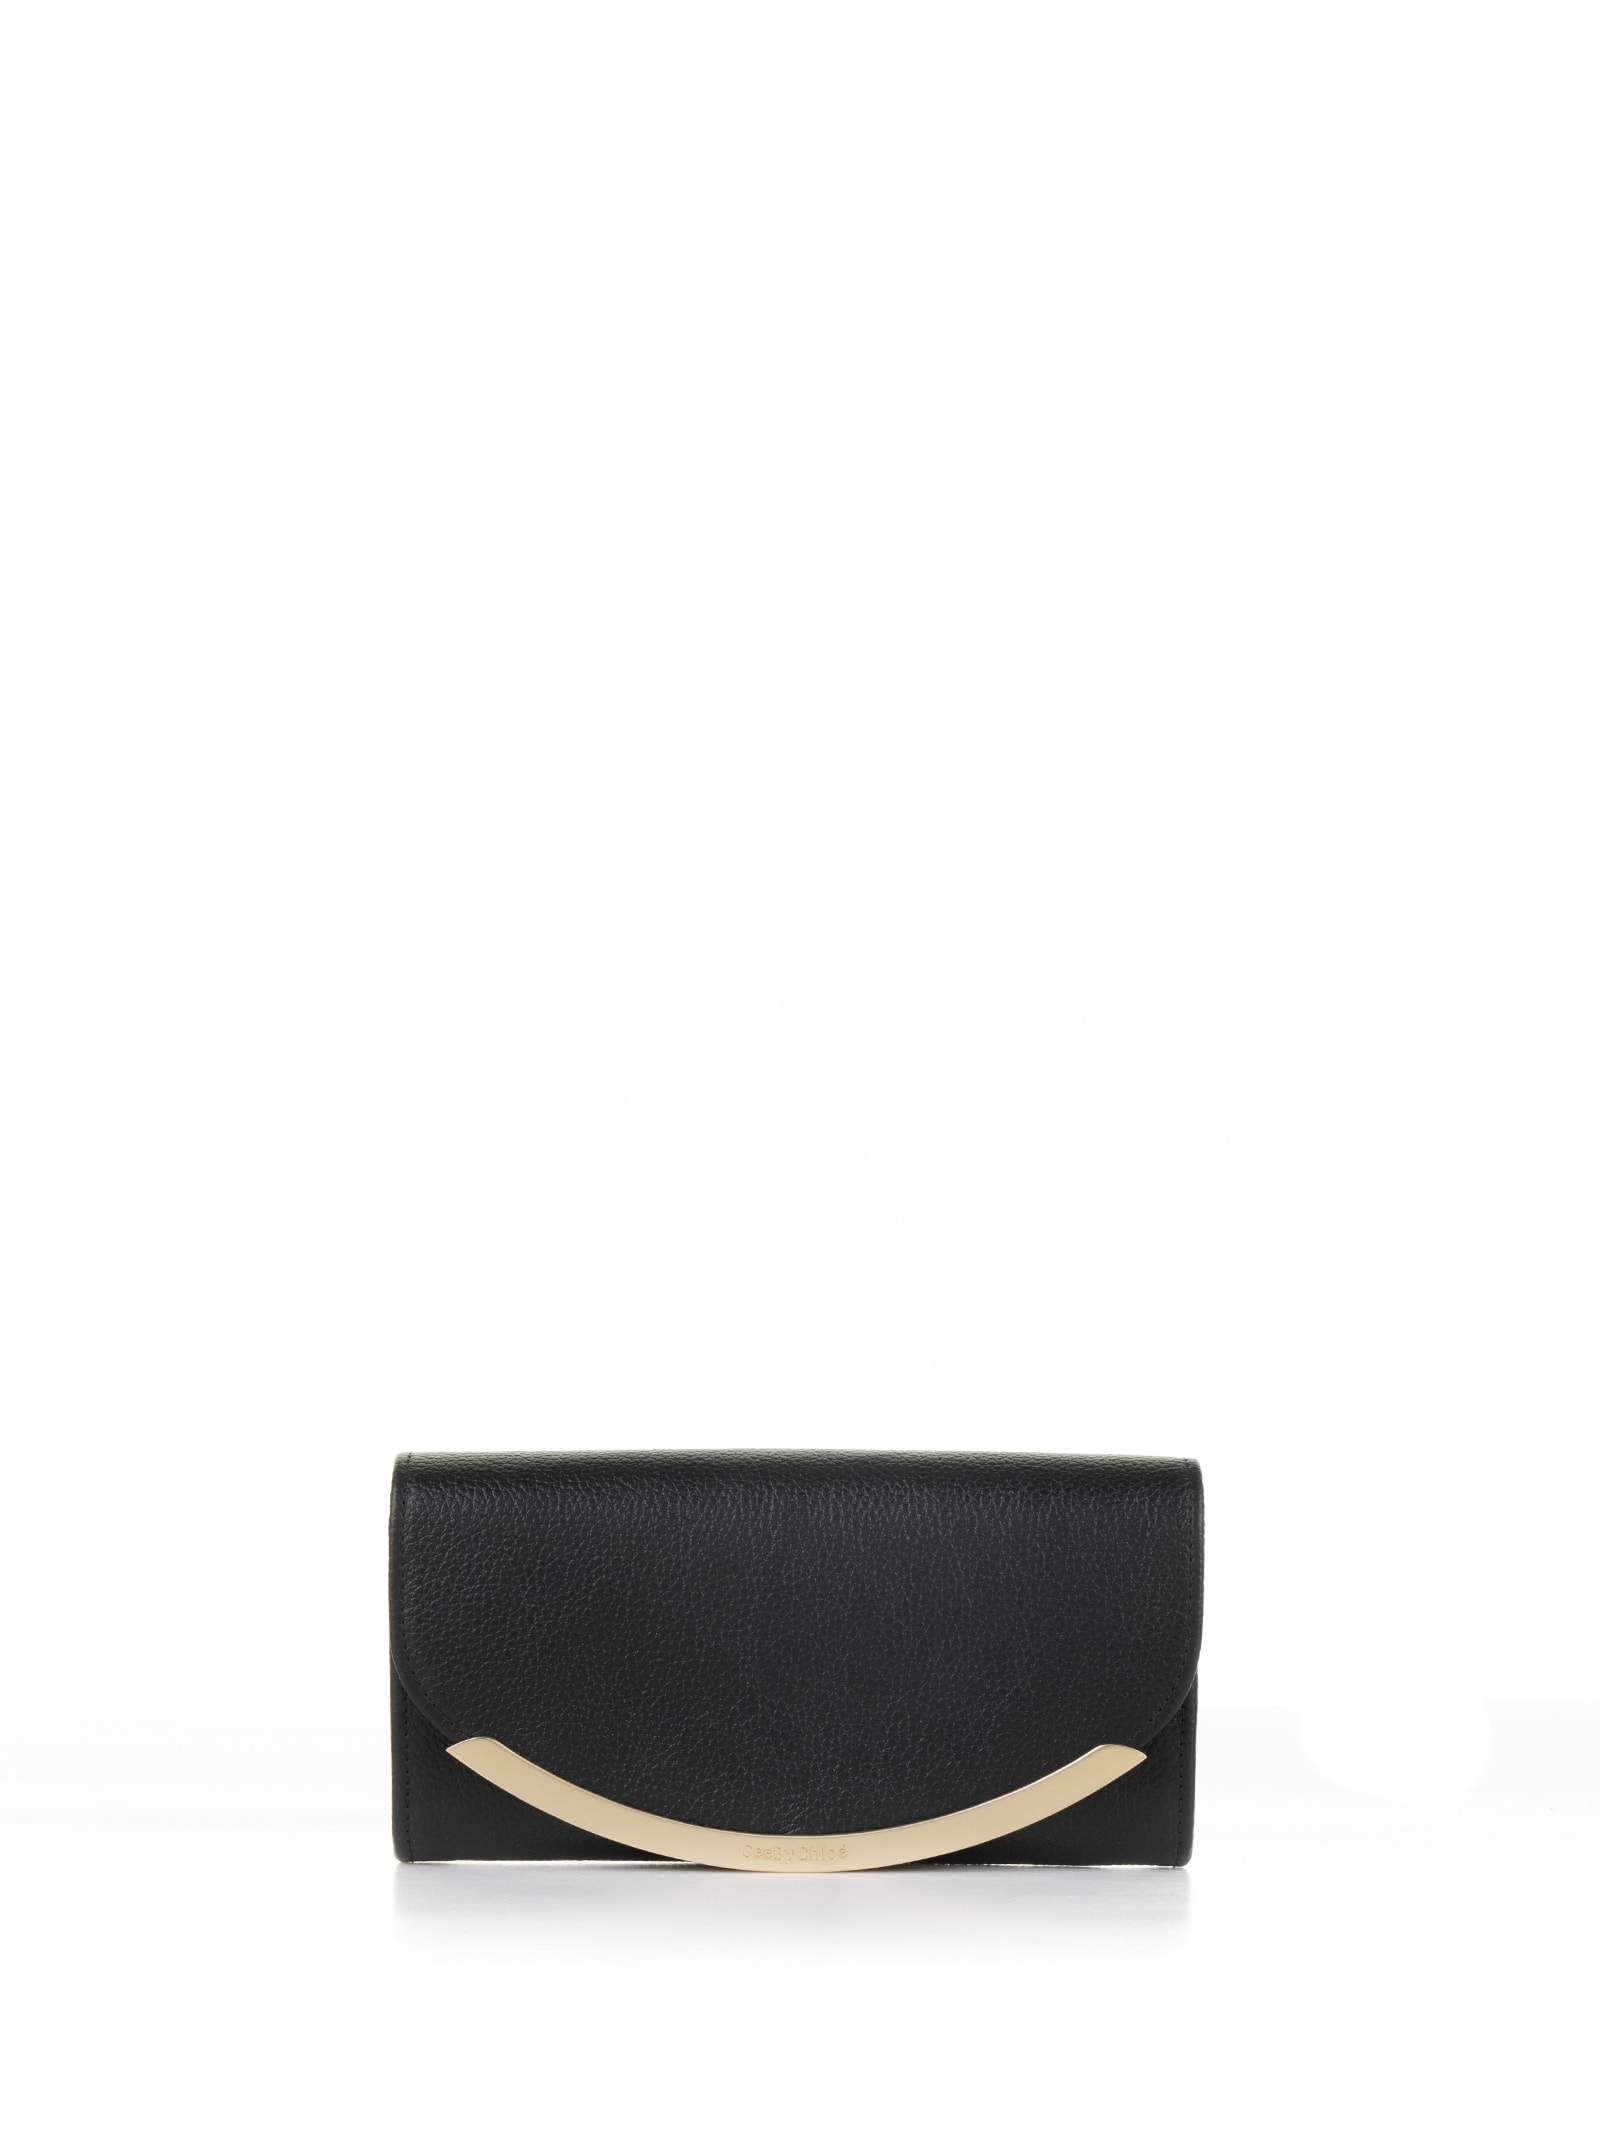 Shop See By Chloé Lizzie Black Leather Wallet